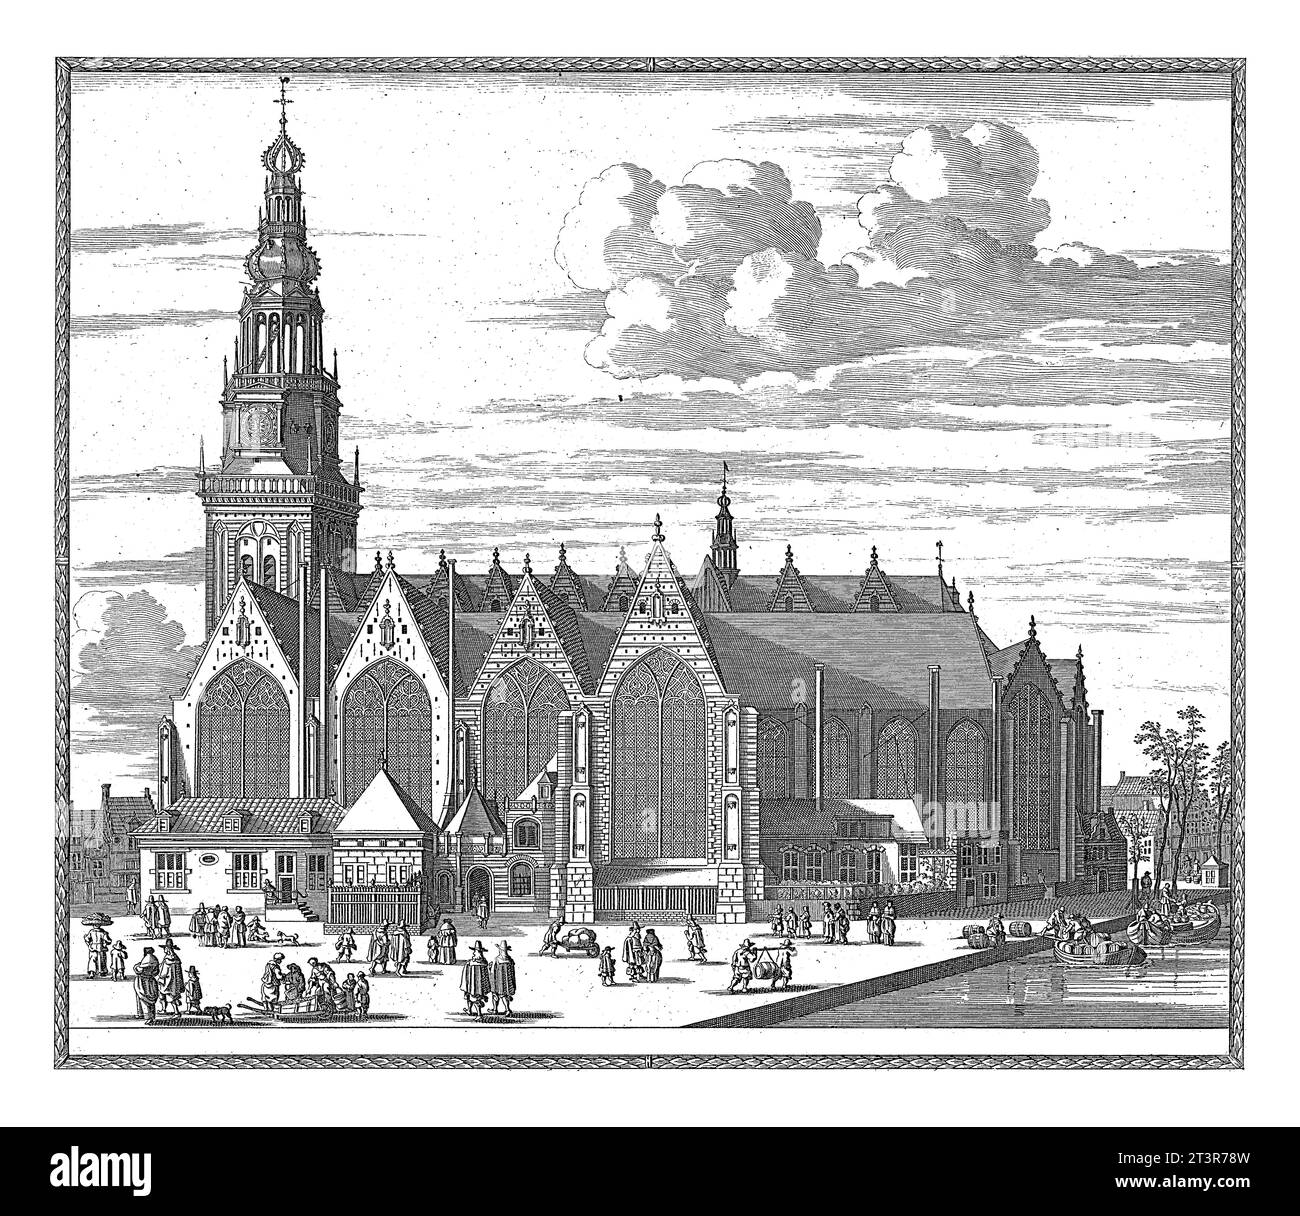 View of the Old Church in Amsterdam, Pieter Hendricksz. Schut, 1662 - 1720 View of the Oude Kerk on the Oudezijds Voorburgwal in Amsterdam. Different Stock Photo